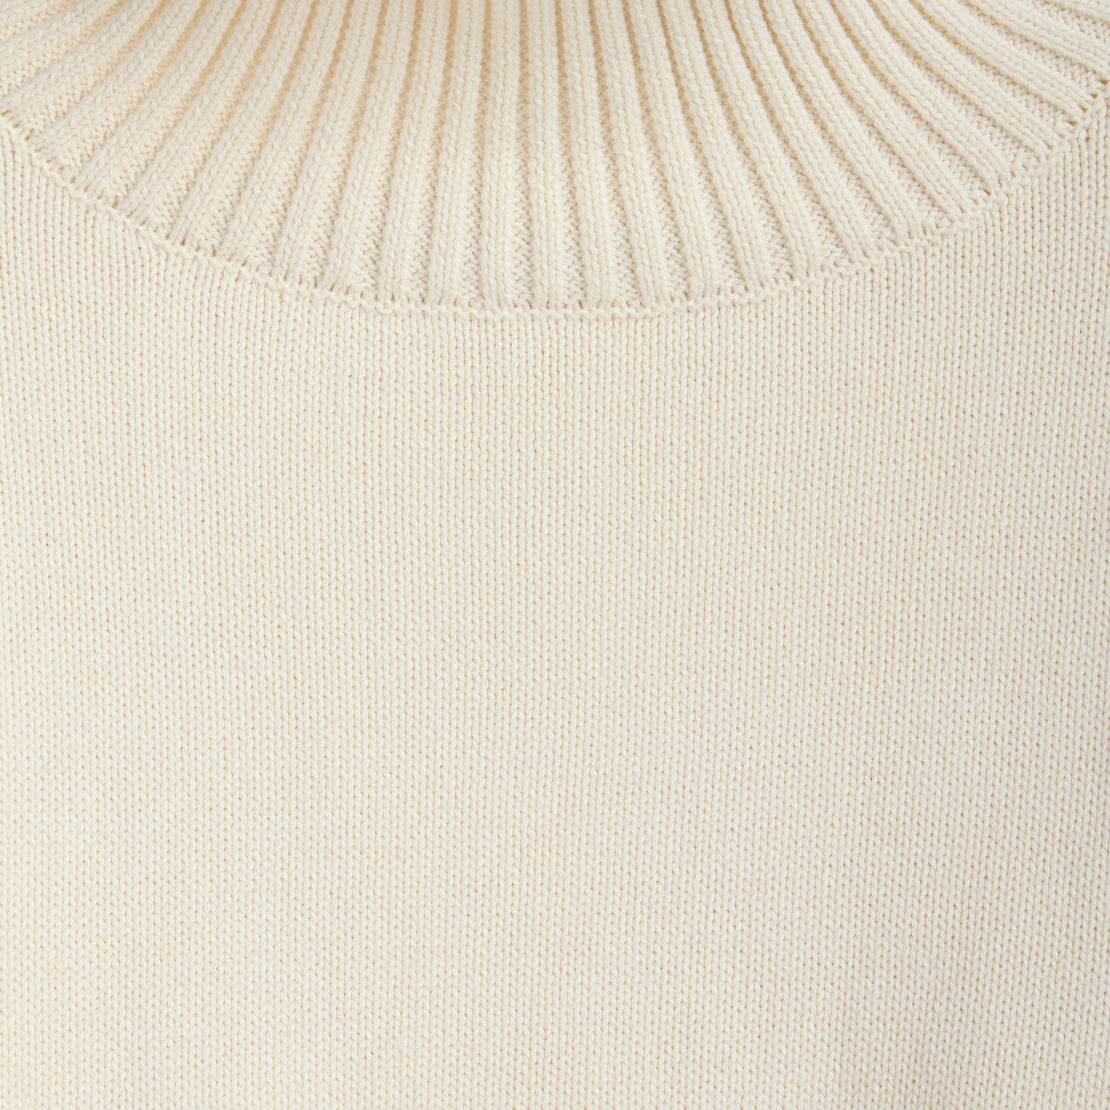 Crop Turtleneck - Ivory - First Rite - STAG Provisions - W - Tops - Sweater